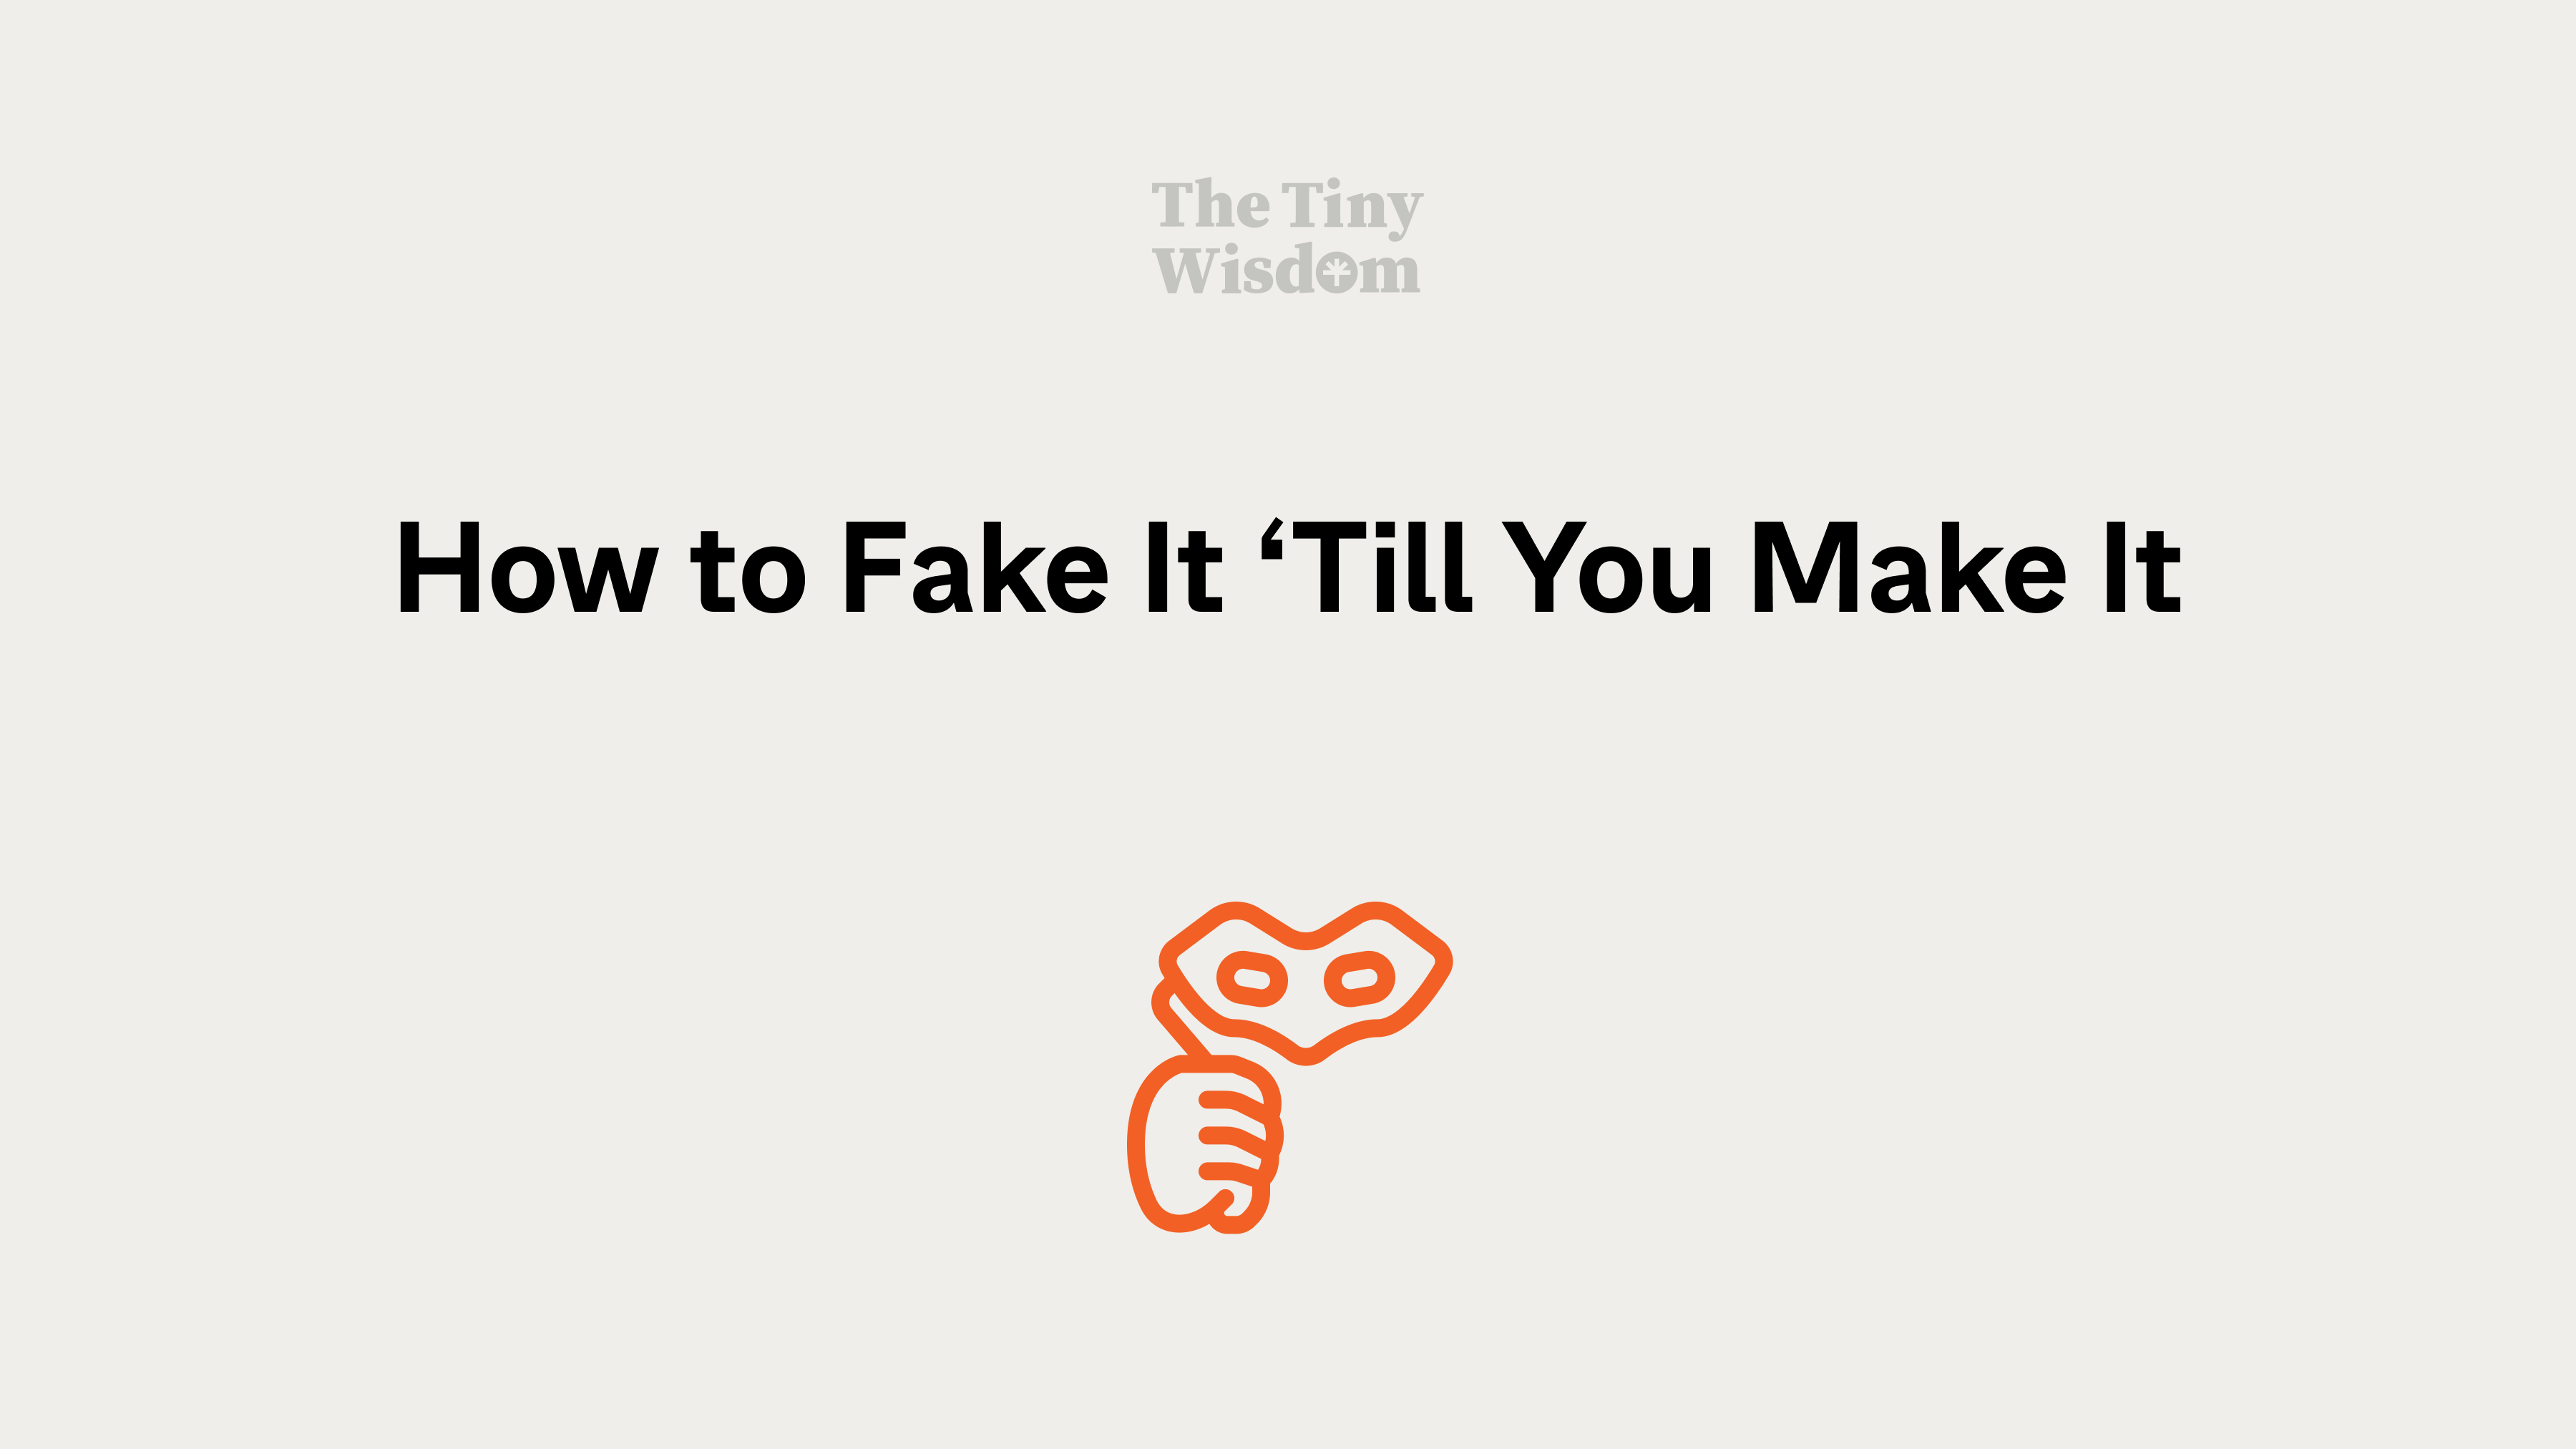 How to "Fake it 'till you make it"